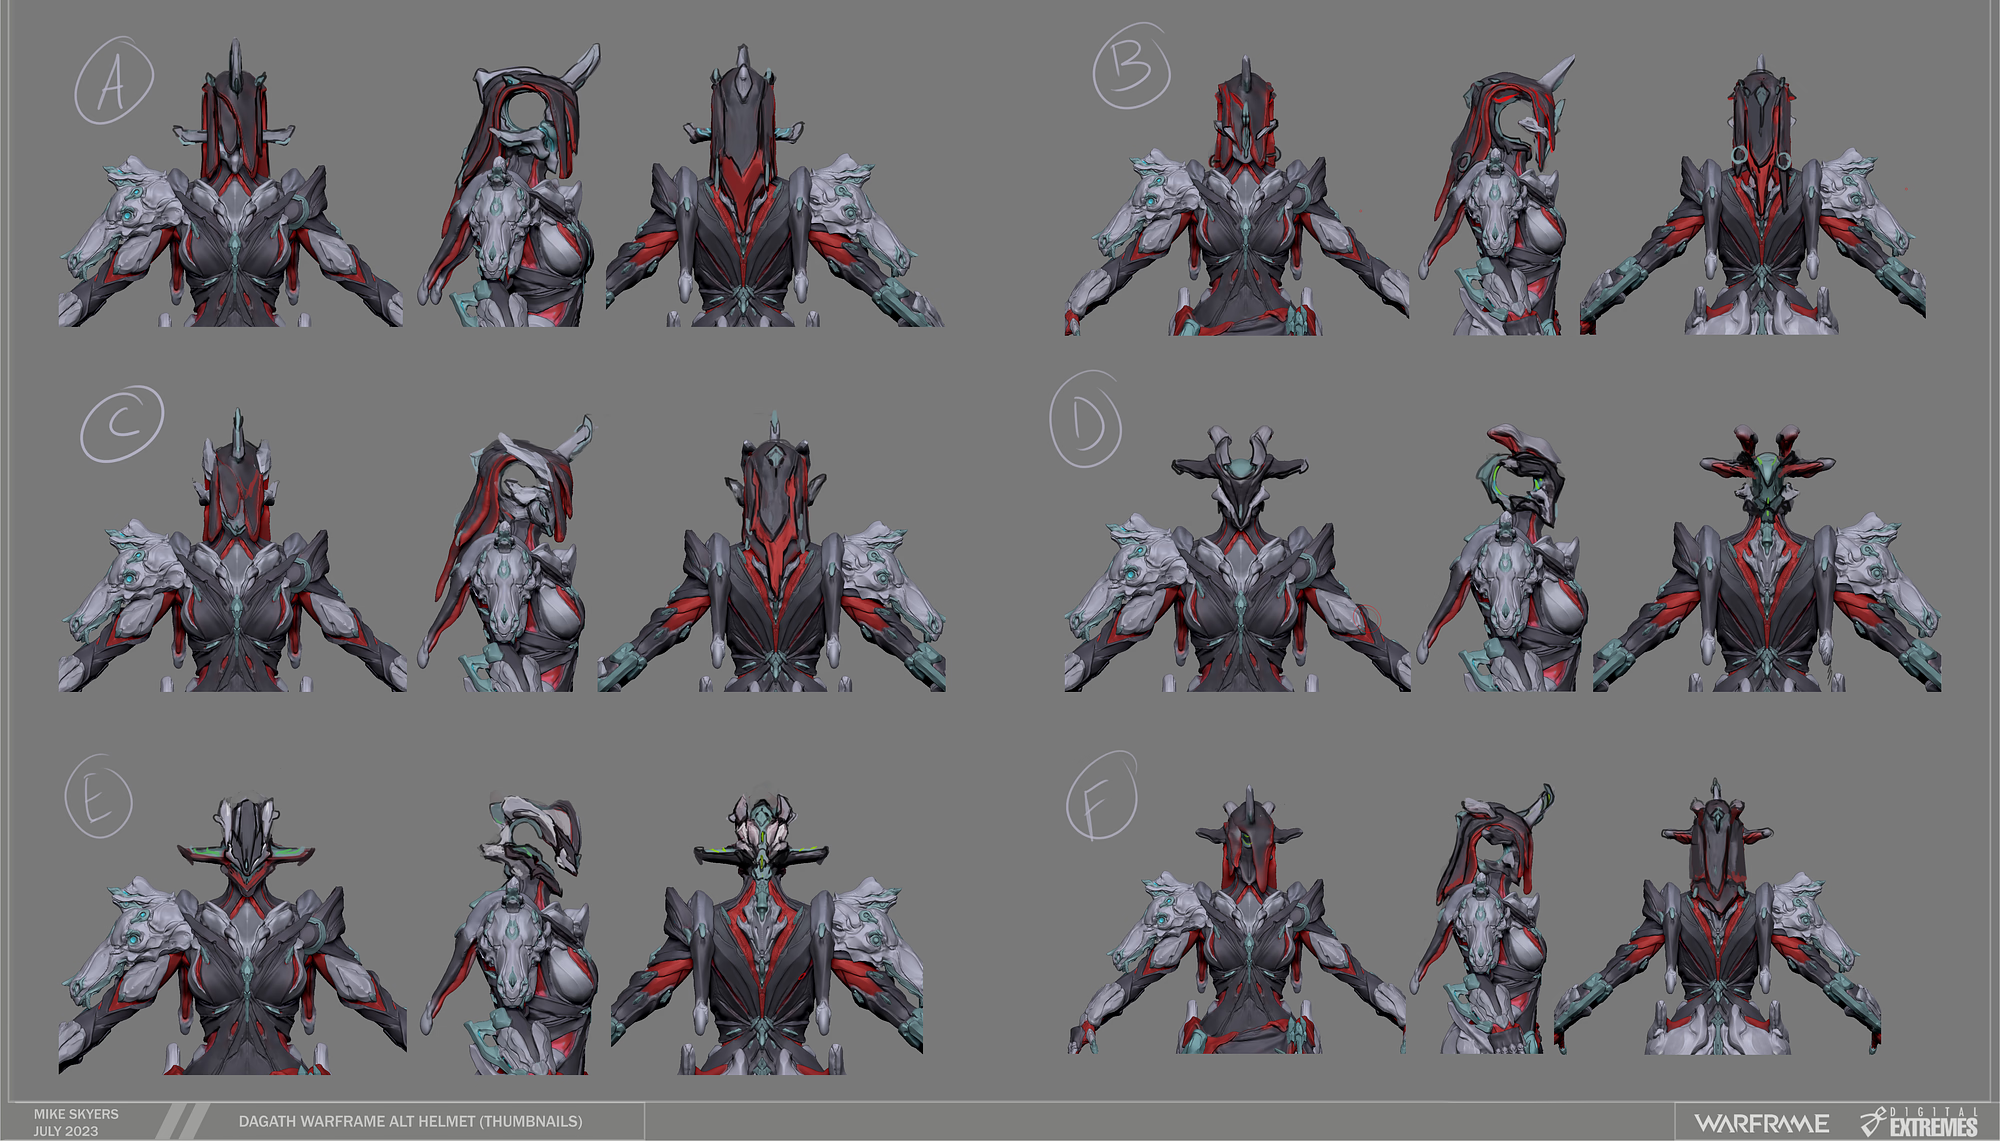 Six iterations on Dagath's warframe design. Some have a hole for a face, others do not.